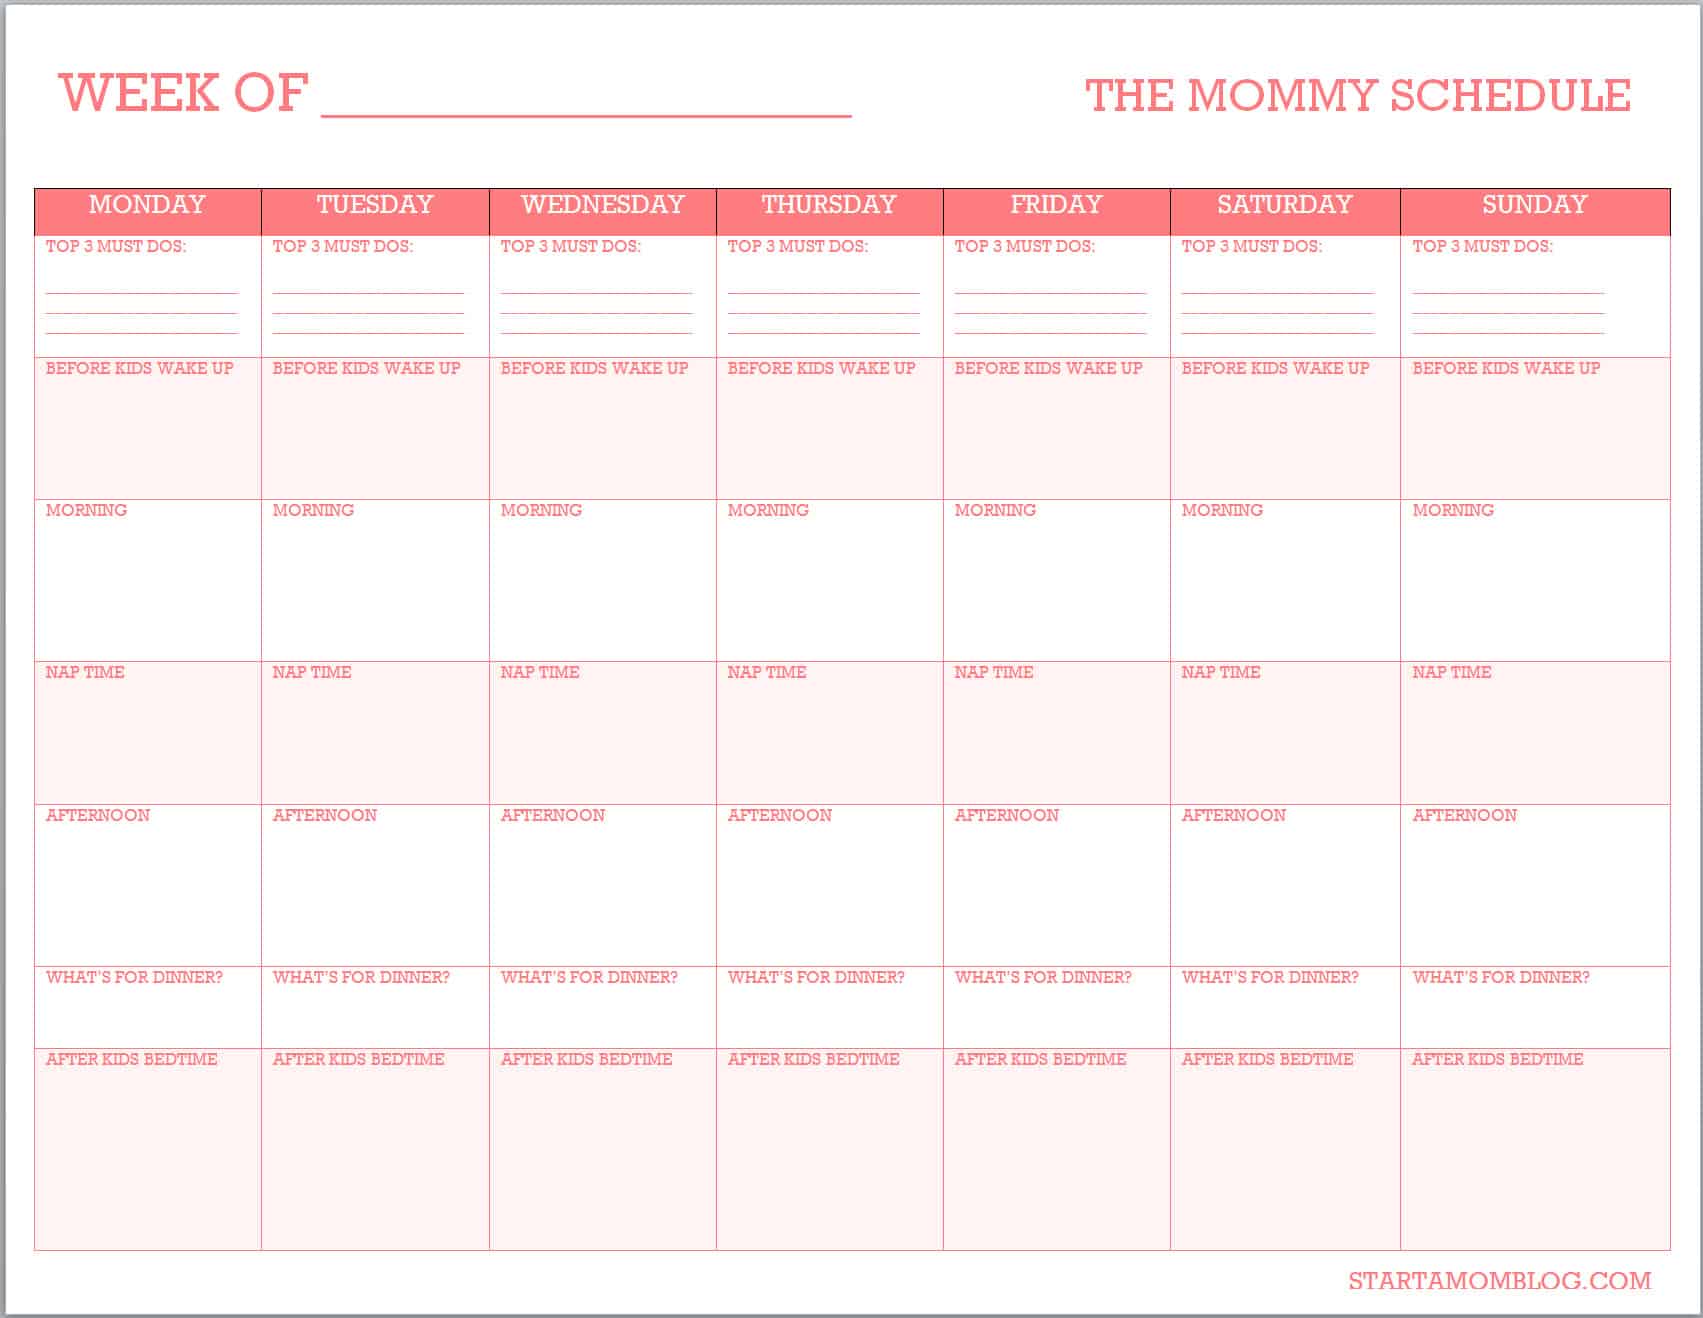 The Mommy Schedule